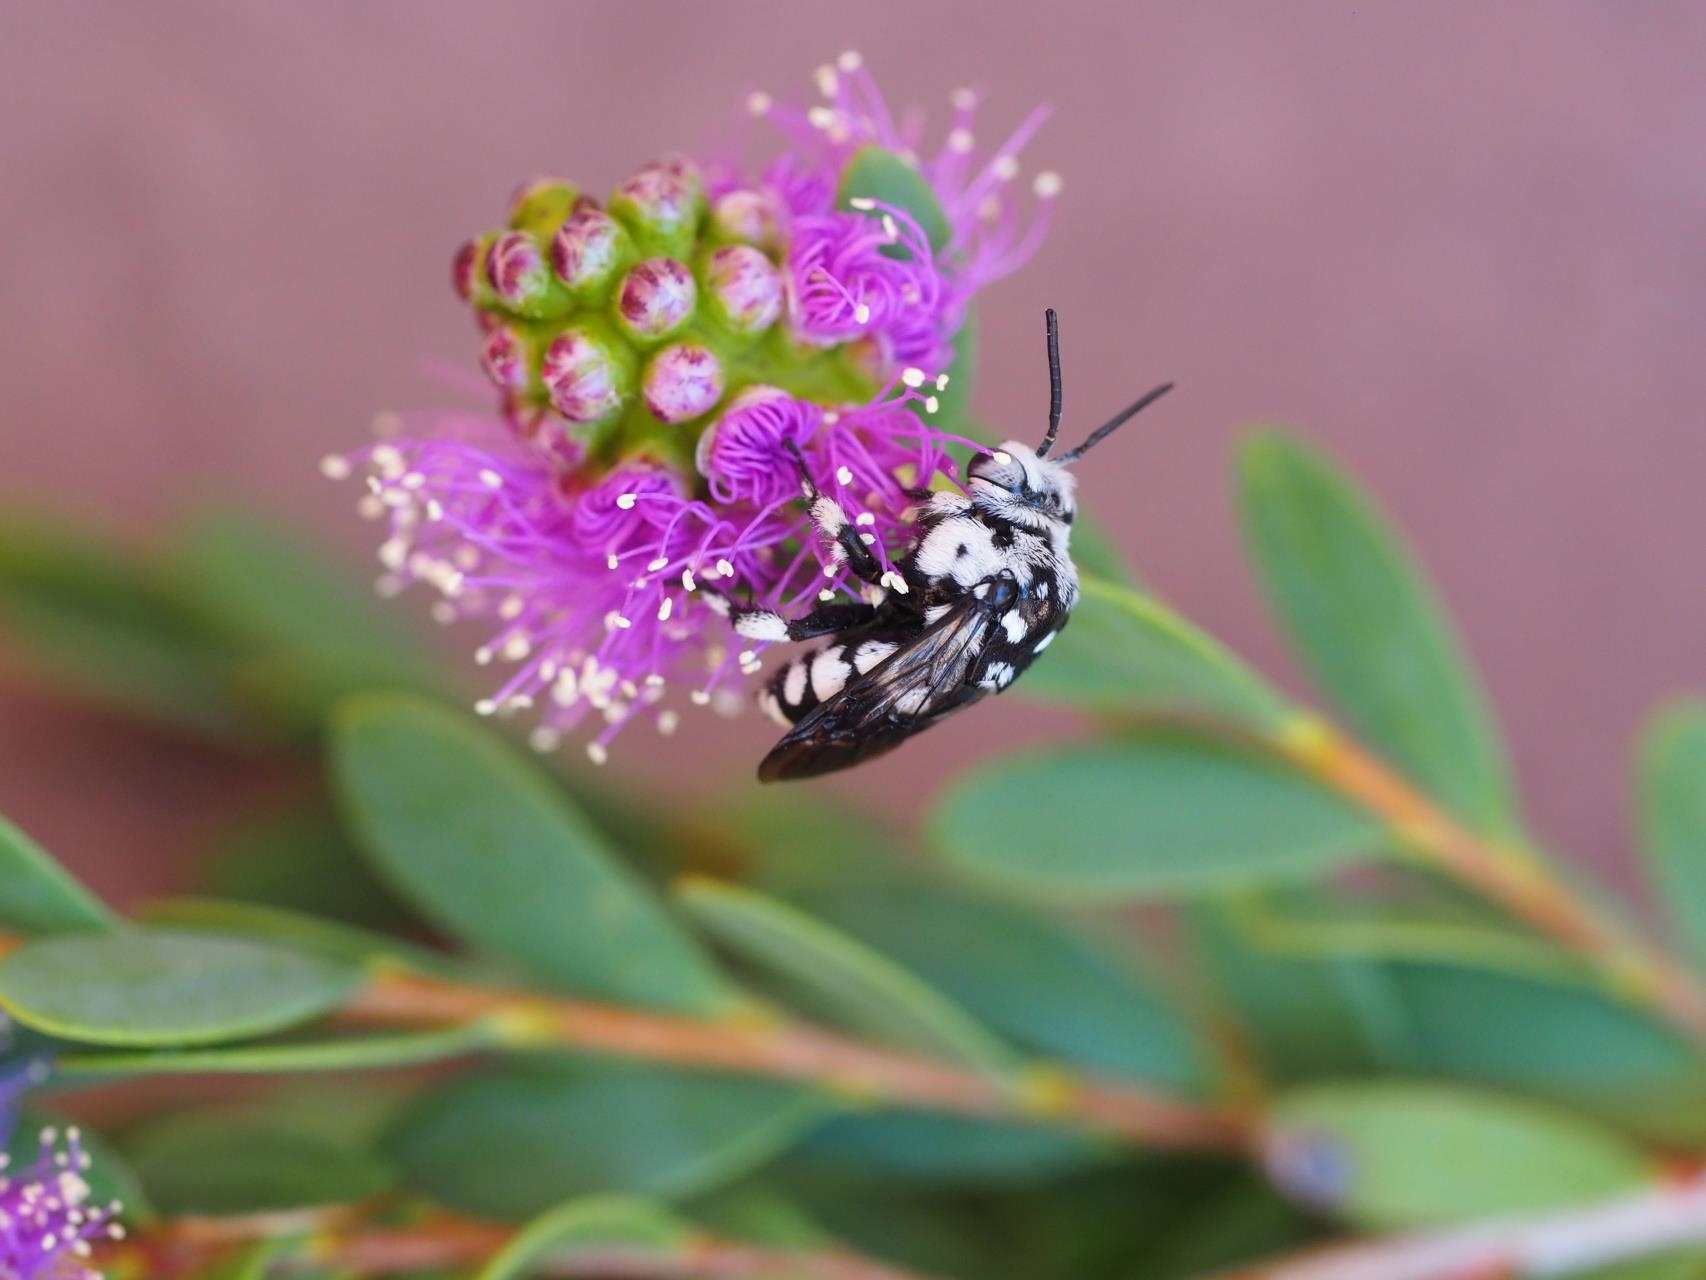 Plants and Animals » City of Busselton